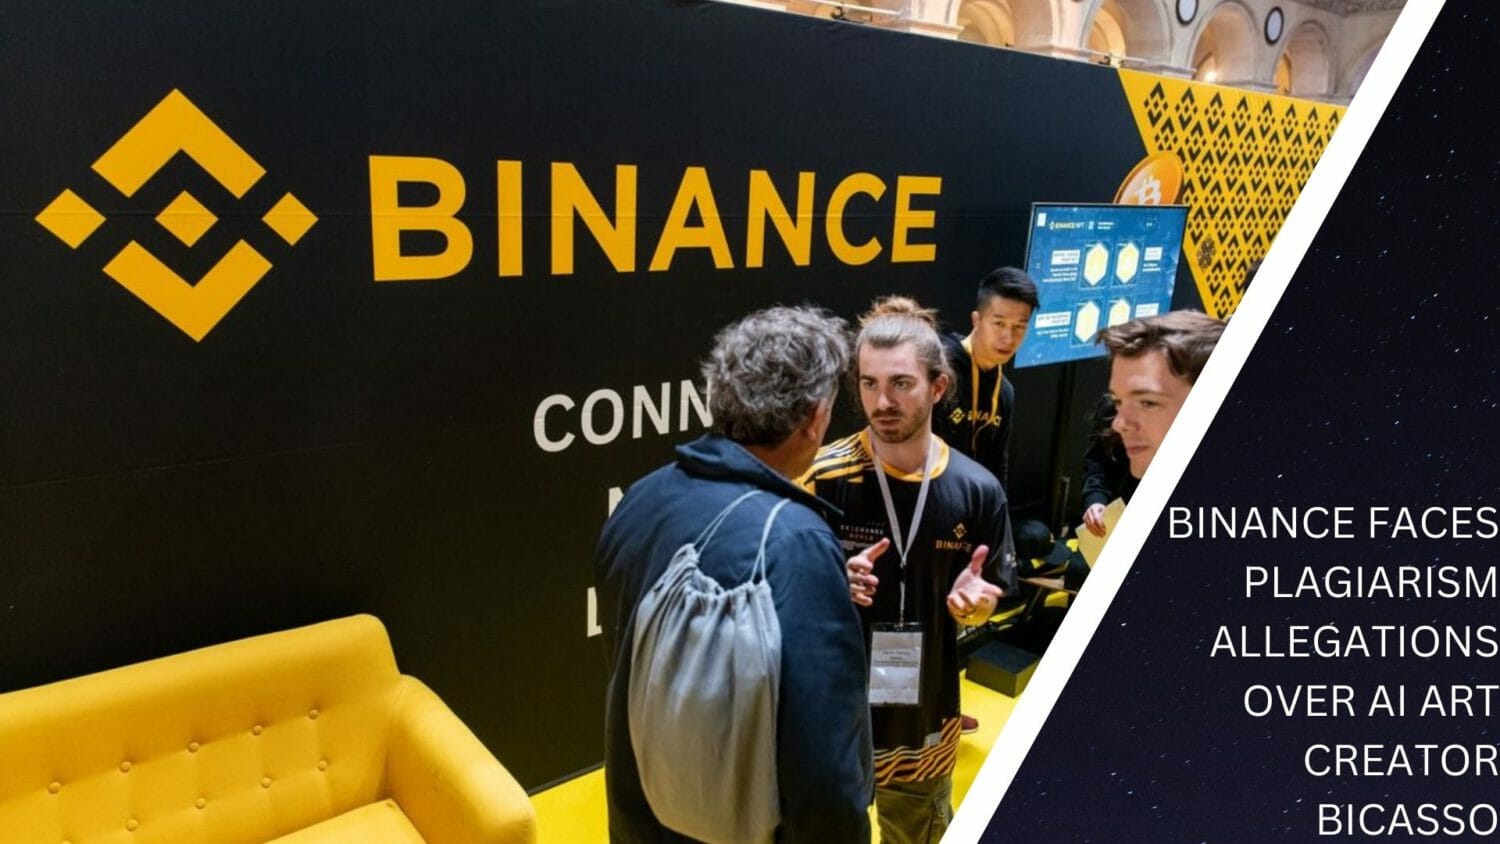 Binance Faces Plagiarism Allegations Over Ai Art Creator Bicasso